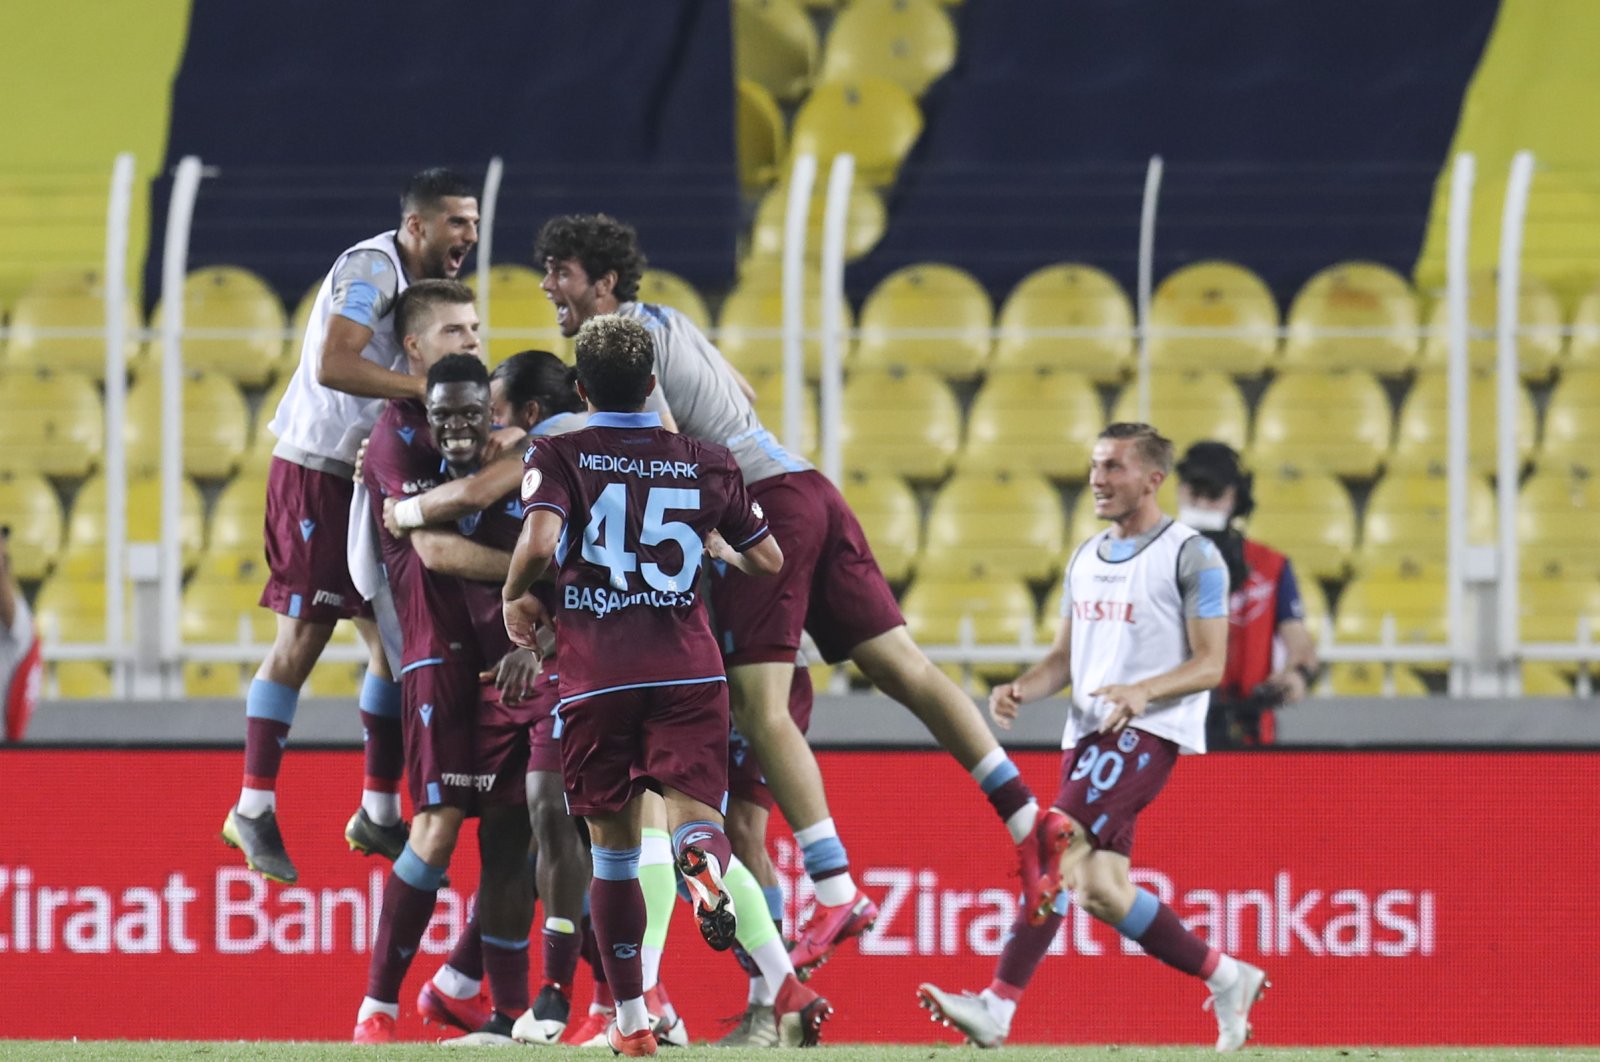 Trabzonspor players celebrate a goal during Ziraat Turkish Cup football match between Fenerbahçe and Trabzonspor at Ülker Stadium in Istanbul, June 16, 2020. (AA Photo)